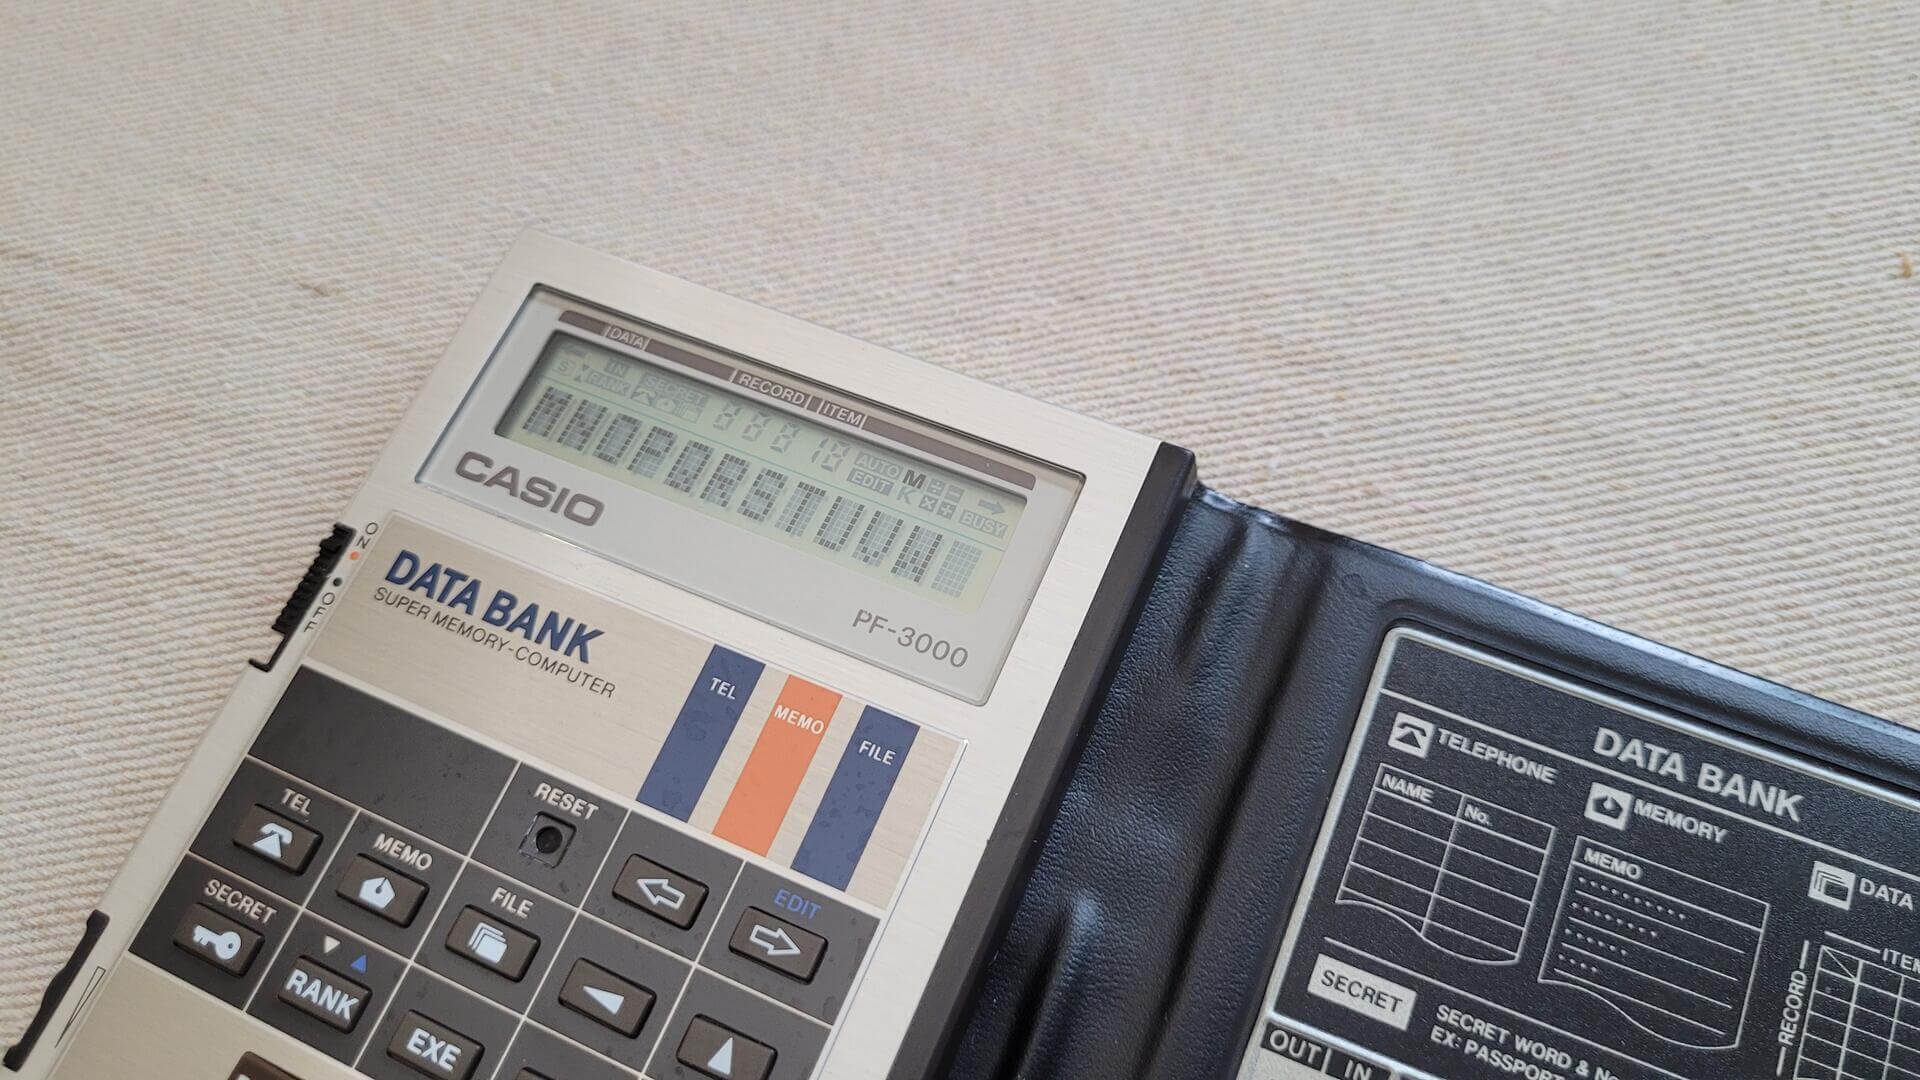 Vintage 1980s Casio Databank PF-3000 Super Memory-Computer Calculator. Rare made in Japan collectible electronic gadget and data bank computer with dot matrix liquid crystal display.